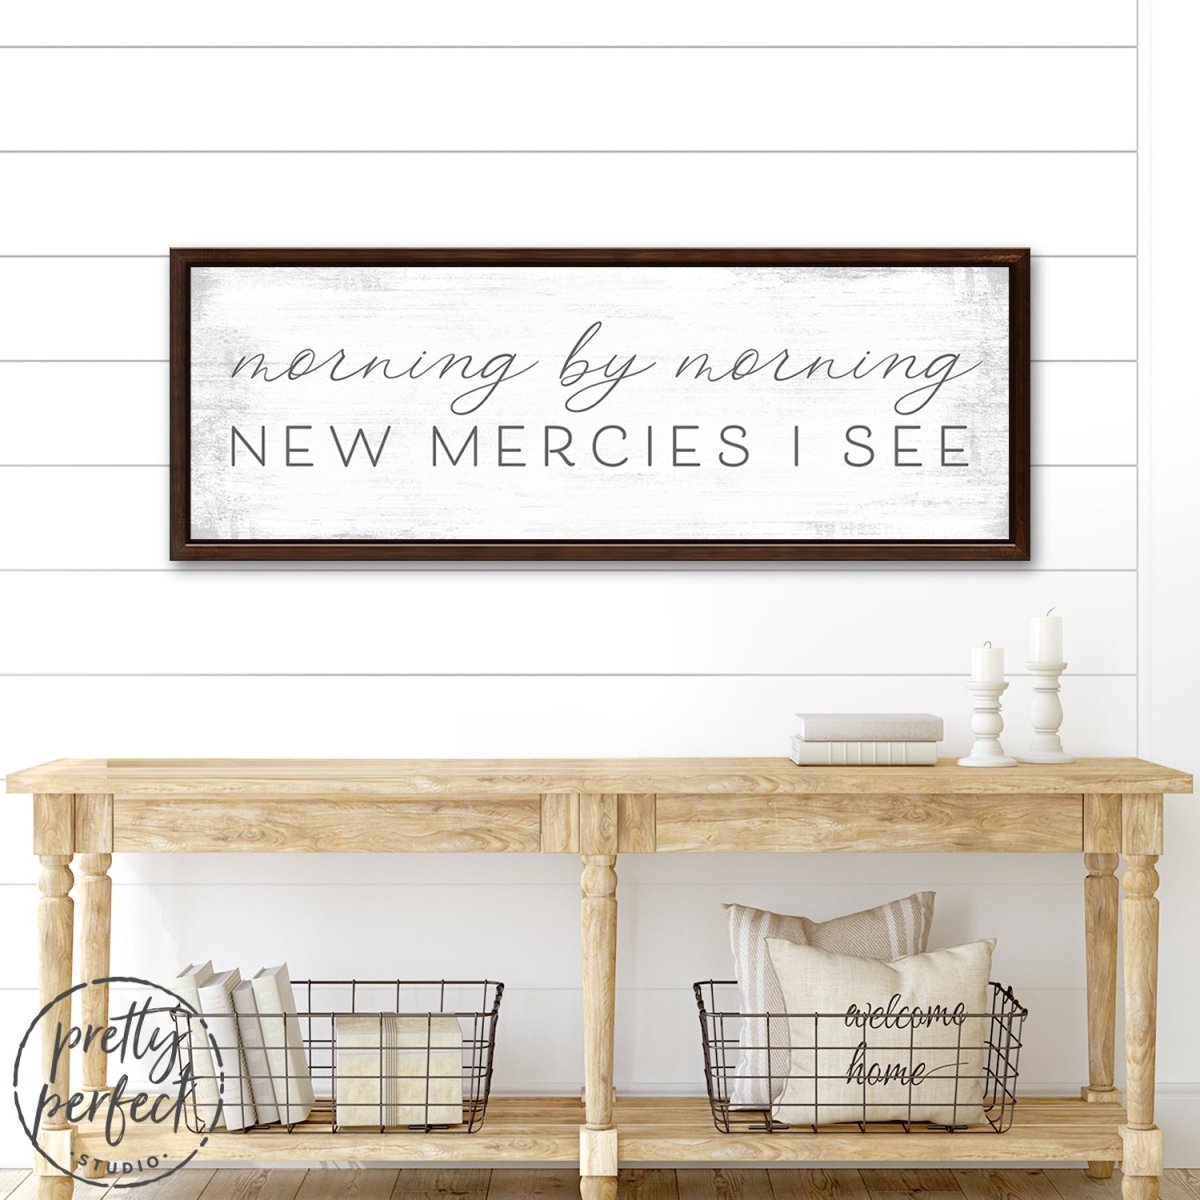 Morning By Morning New Mercies I See Sign Above Entryway Table - Pretty Perfect Studio